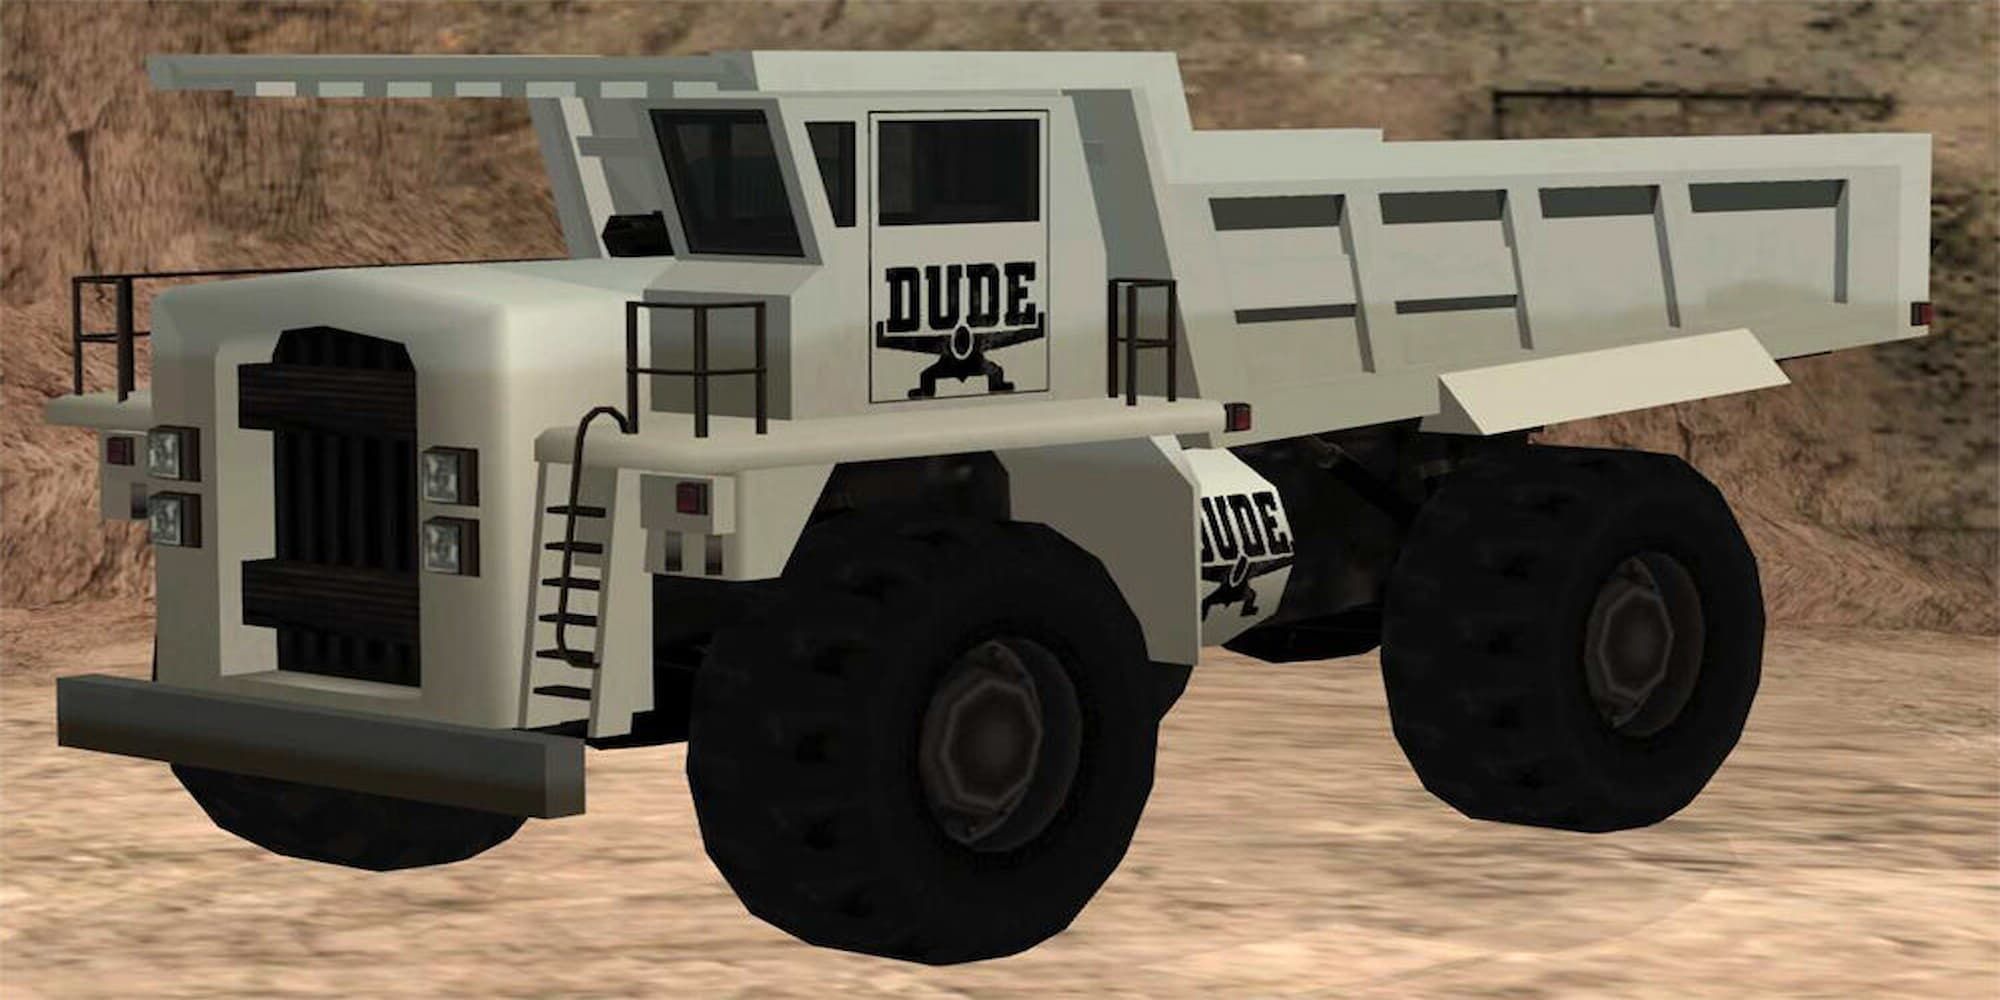 The Dumper found in the Quarry in GTA San Andreas